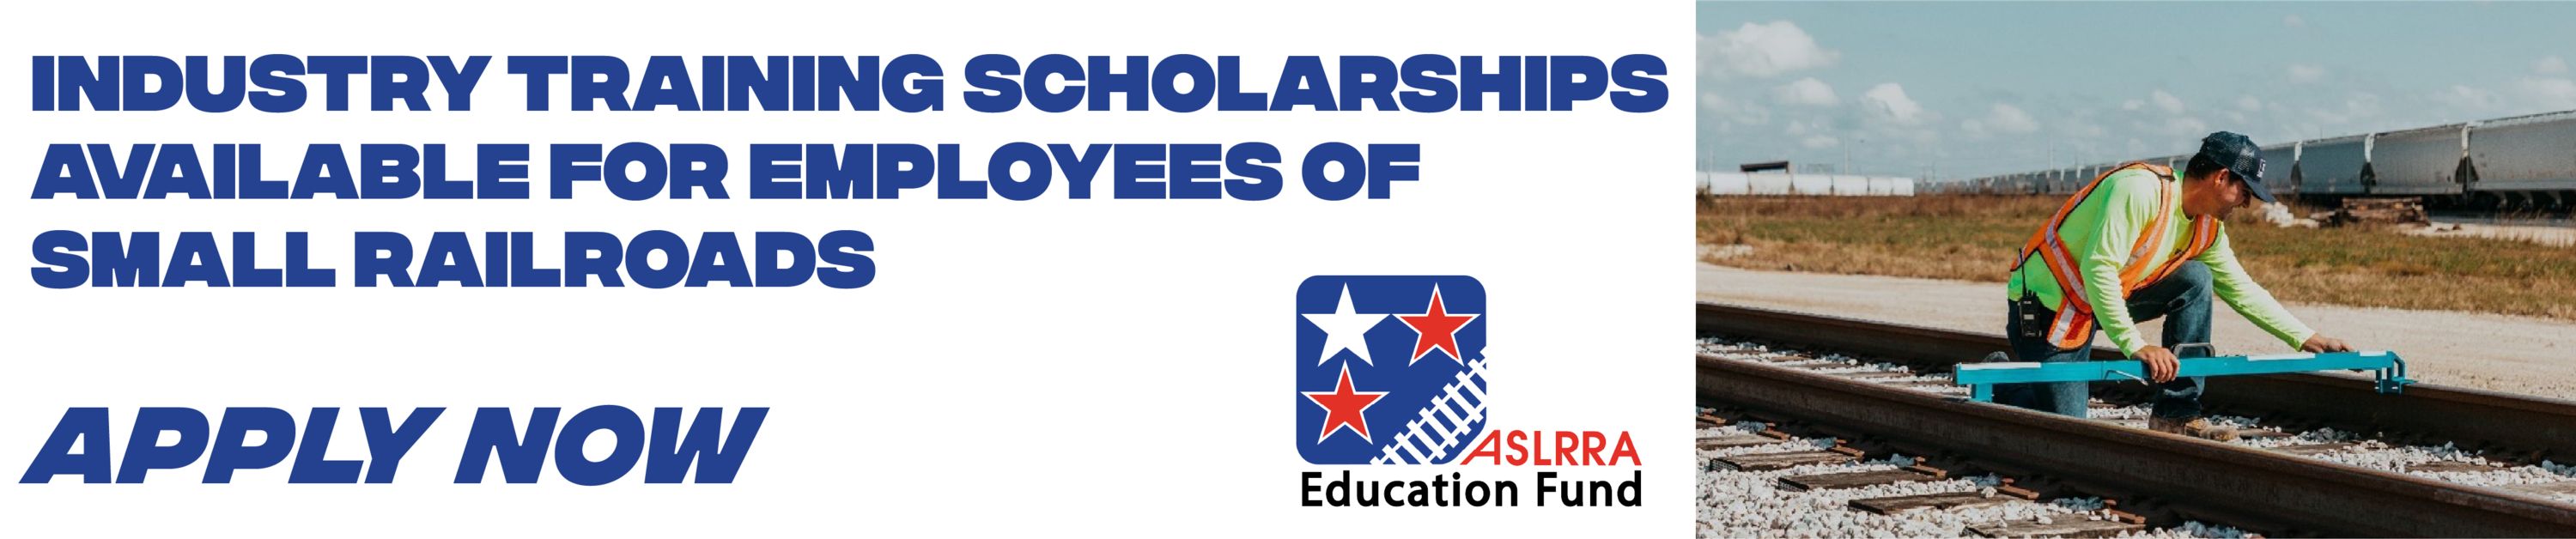 Industry Scholarships ad